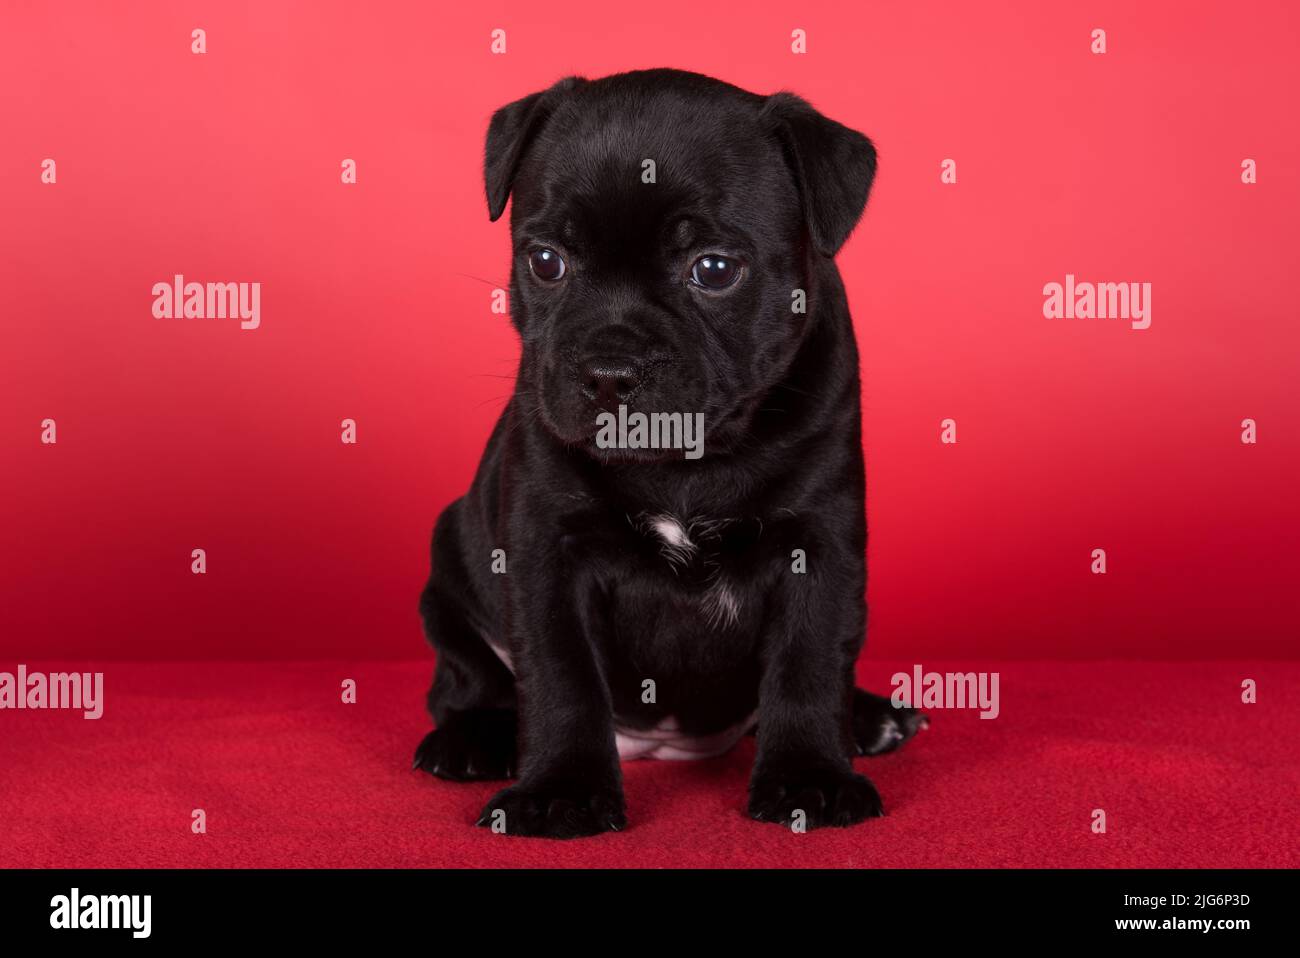 Black female American Staffordshire Terrier dog or AmStaff puppy on red background Stock Photo